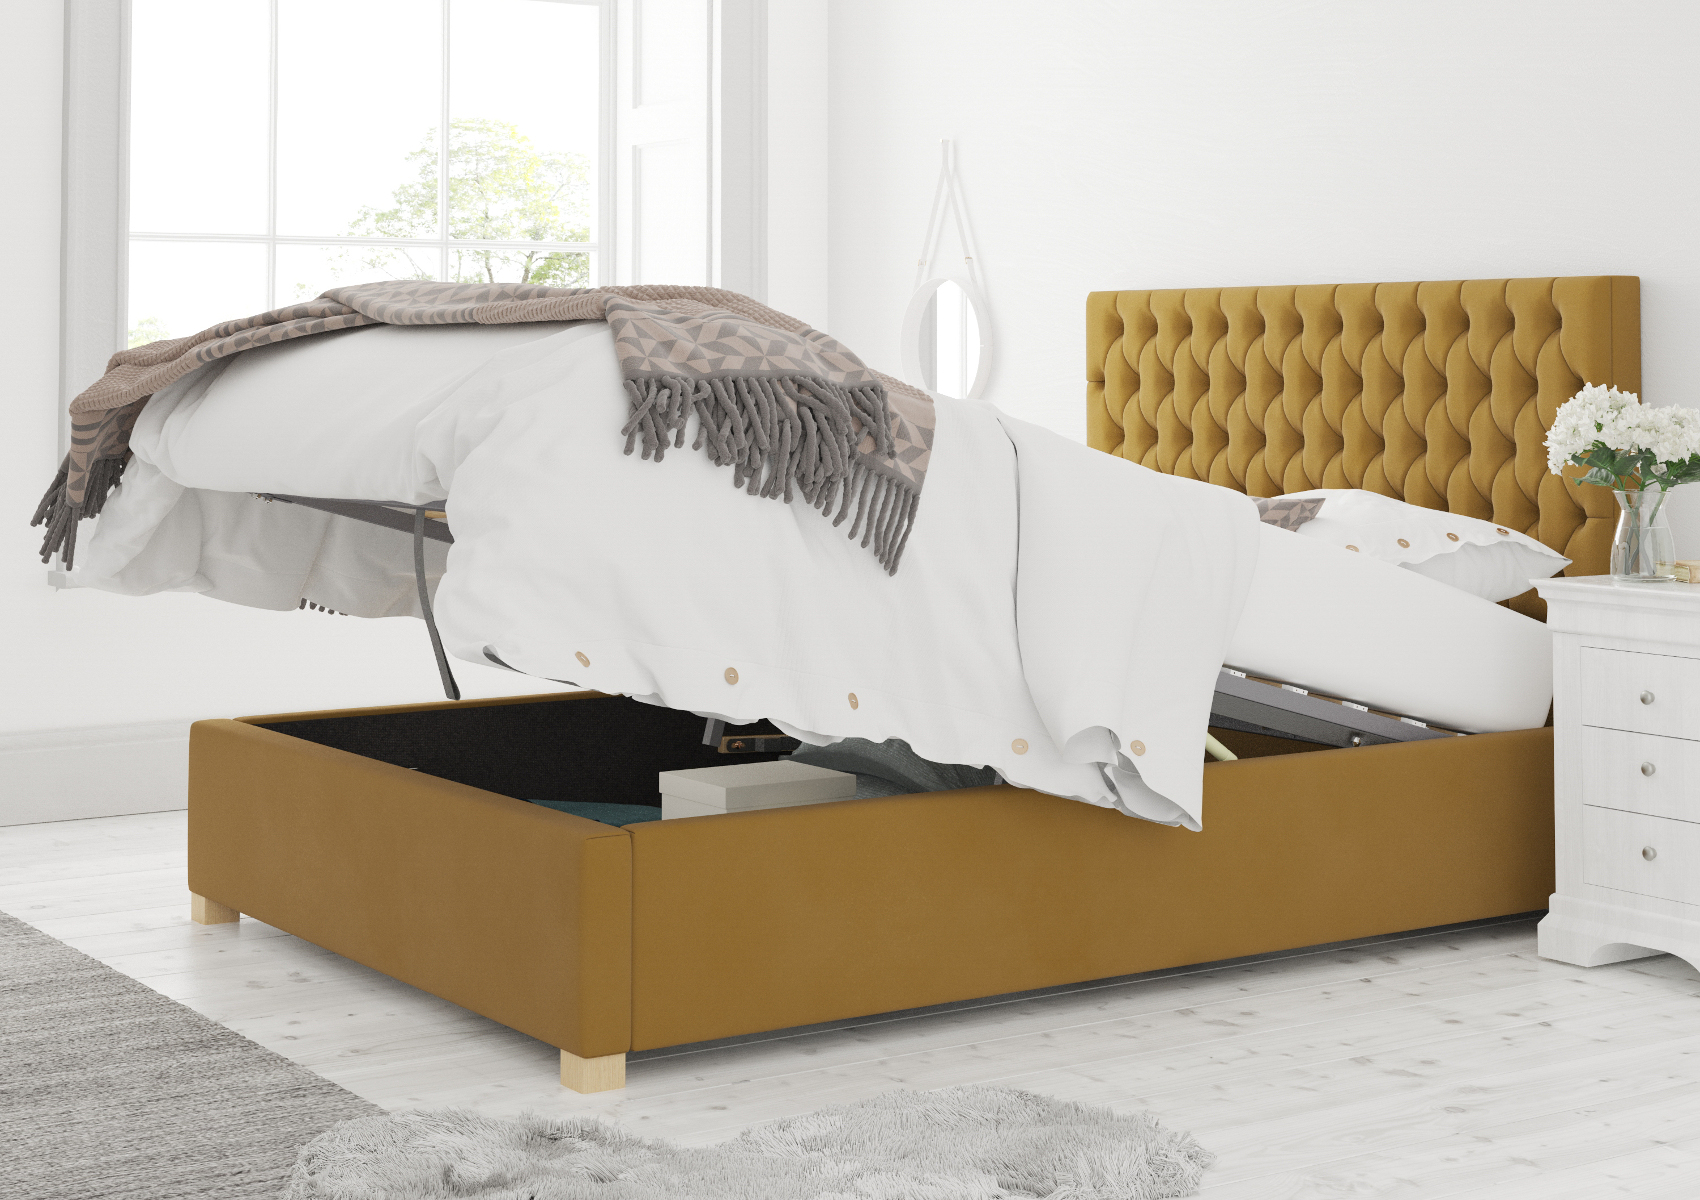 View Malton Ochre Upholstered King Size Ottoman Bed Time4Sleep information